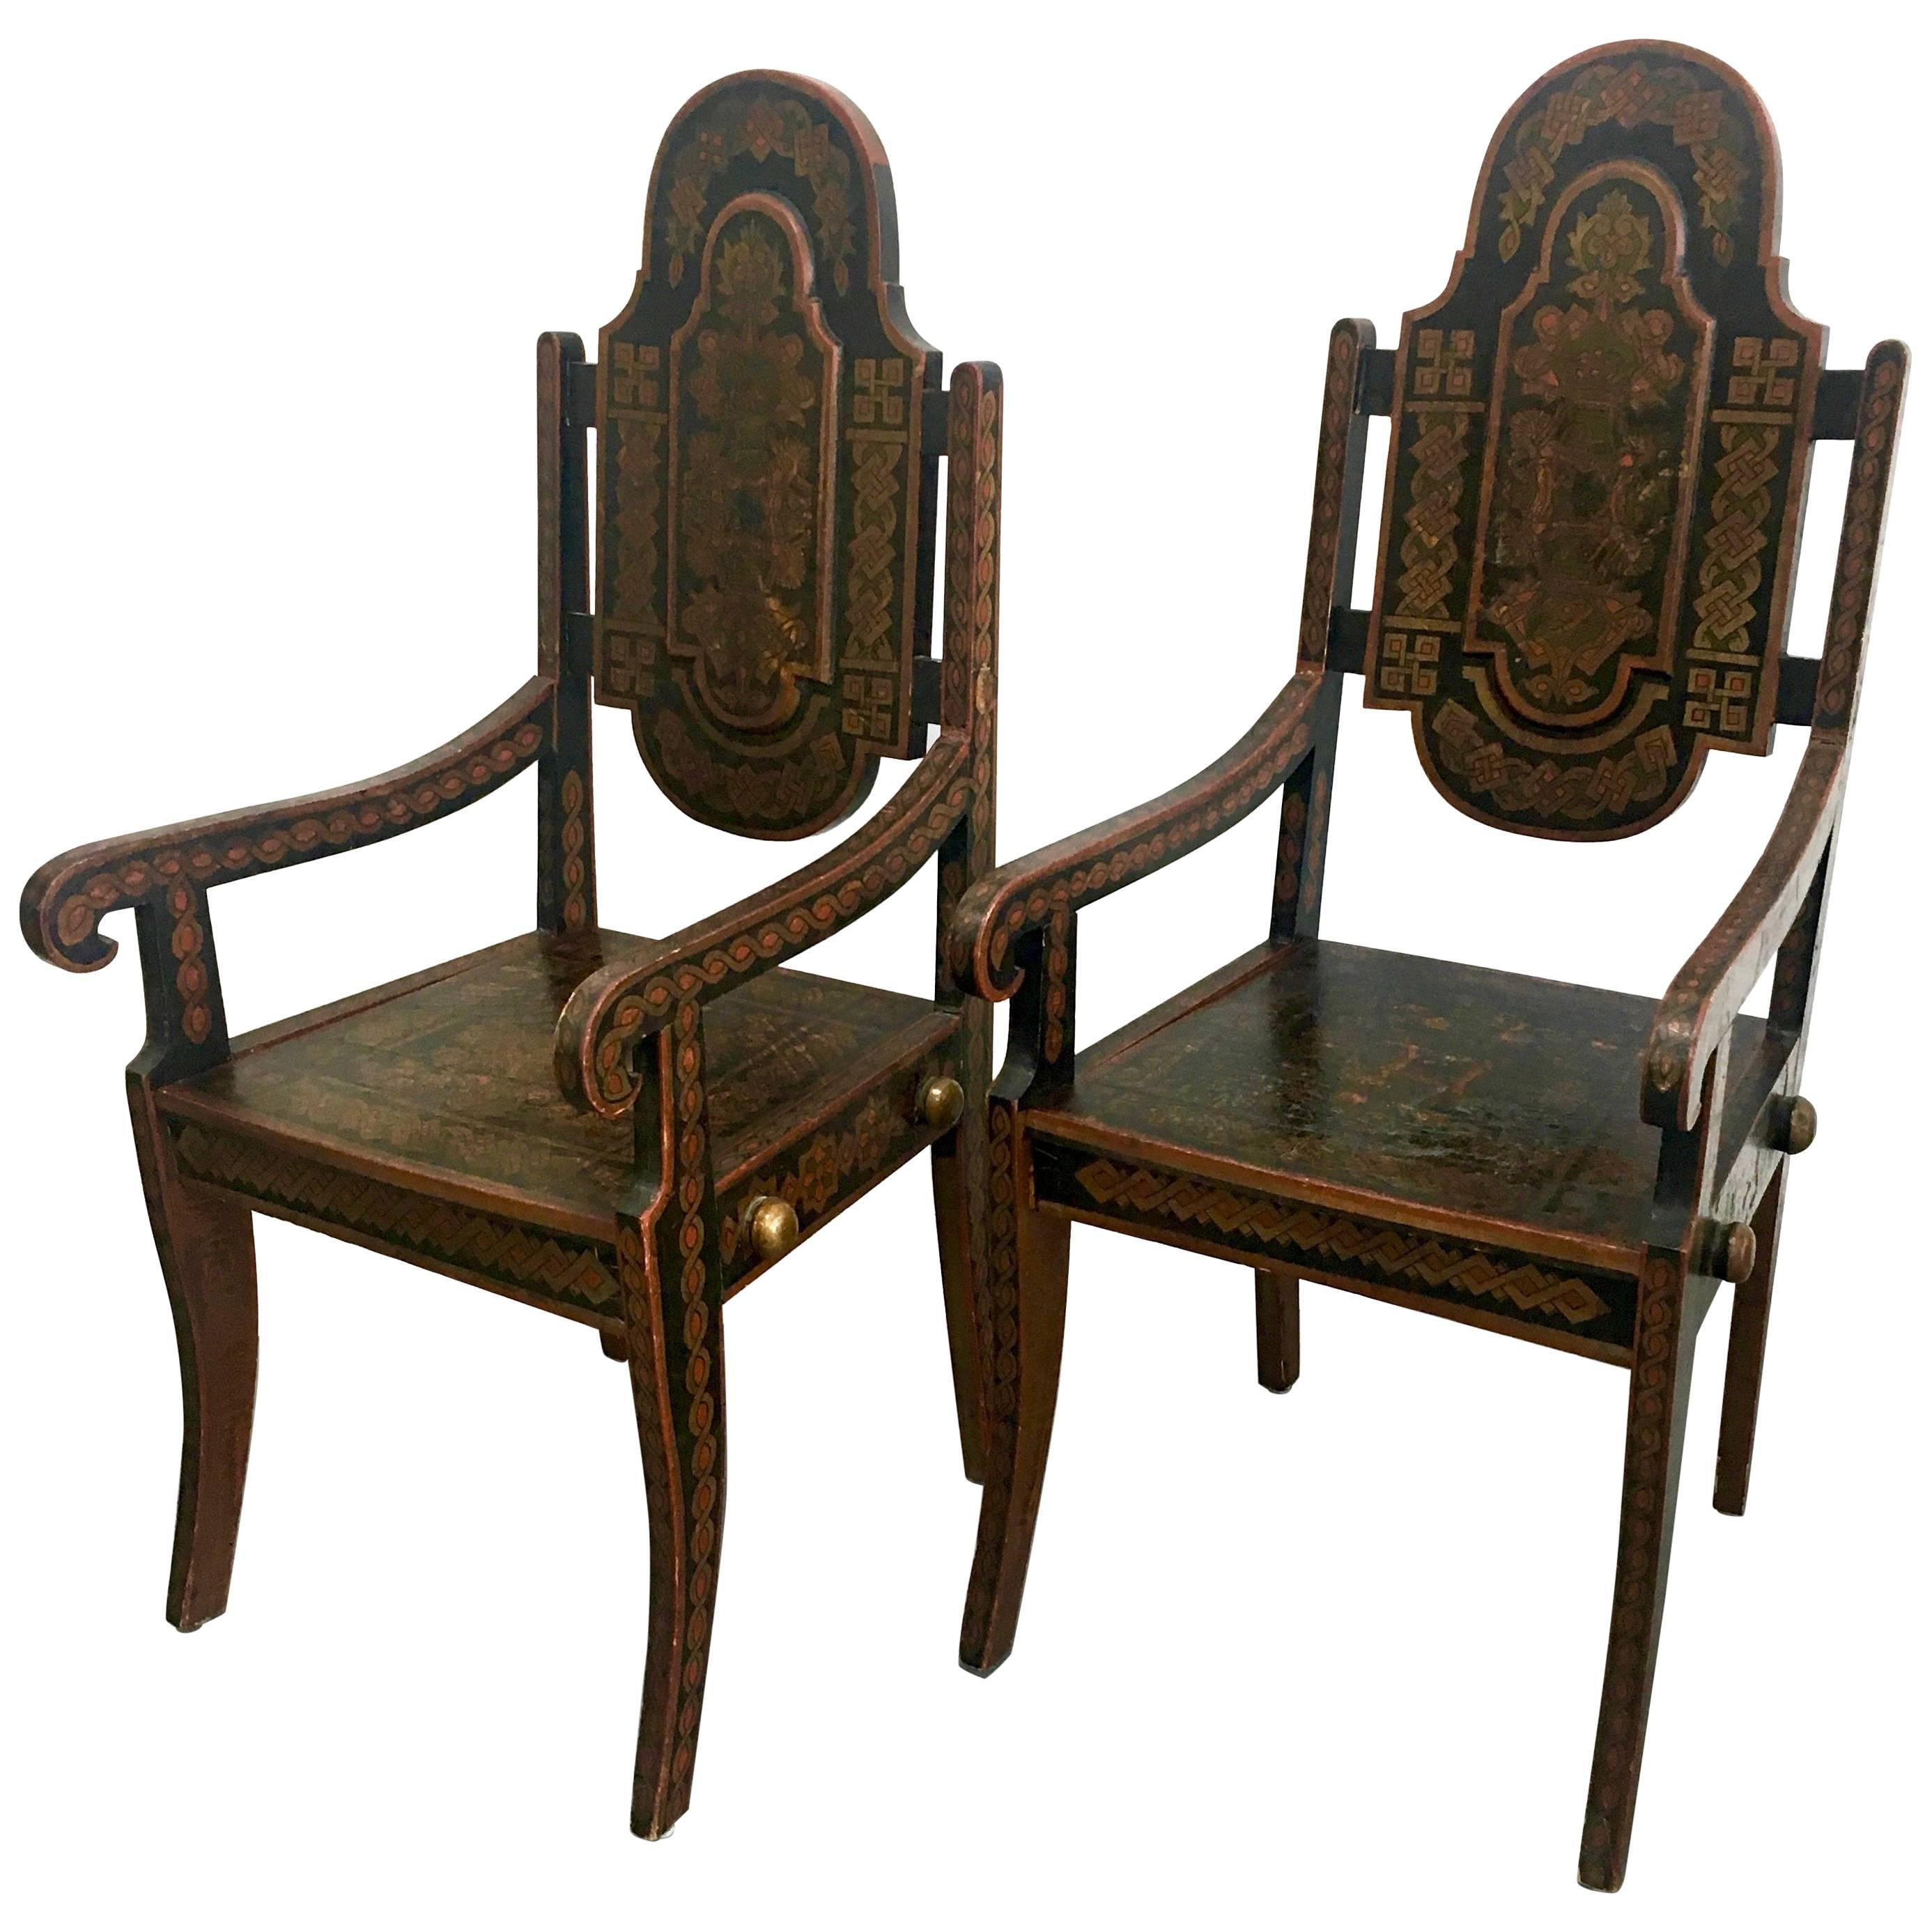  19th Century Hand-Crafted Moroccan chairs For Sale